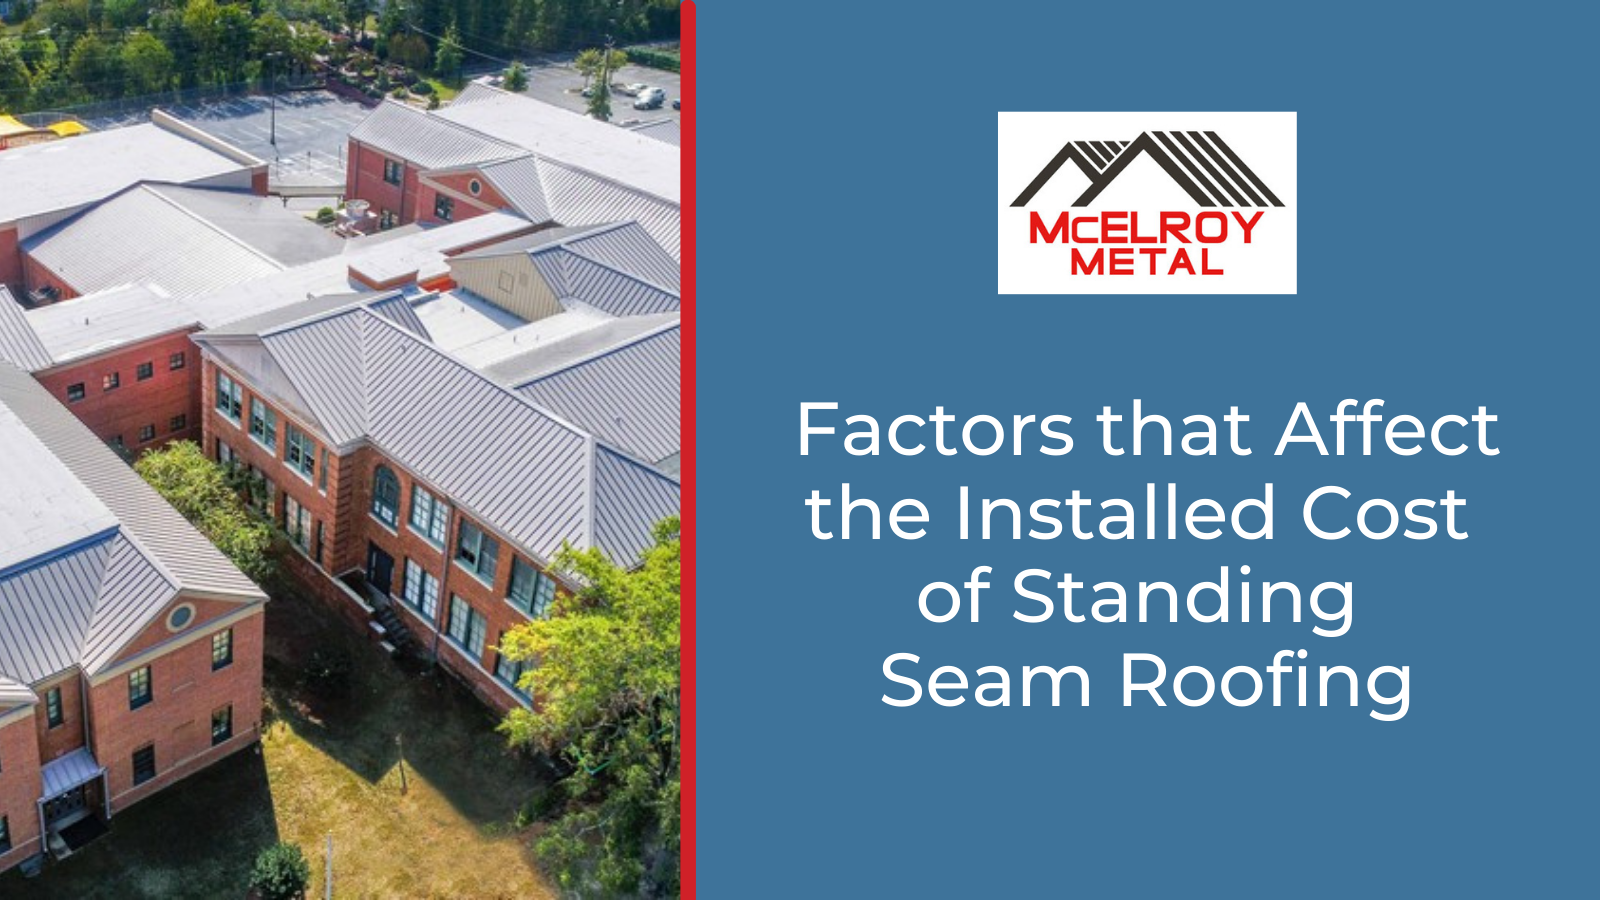 Factors that Affect the Installed Cost of Standing Seam Roofing